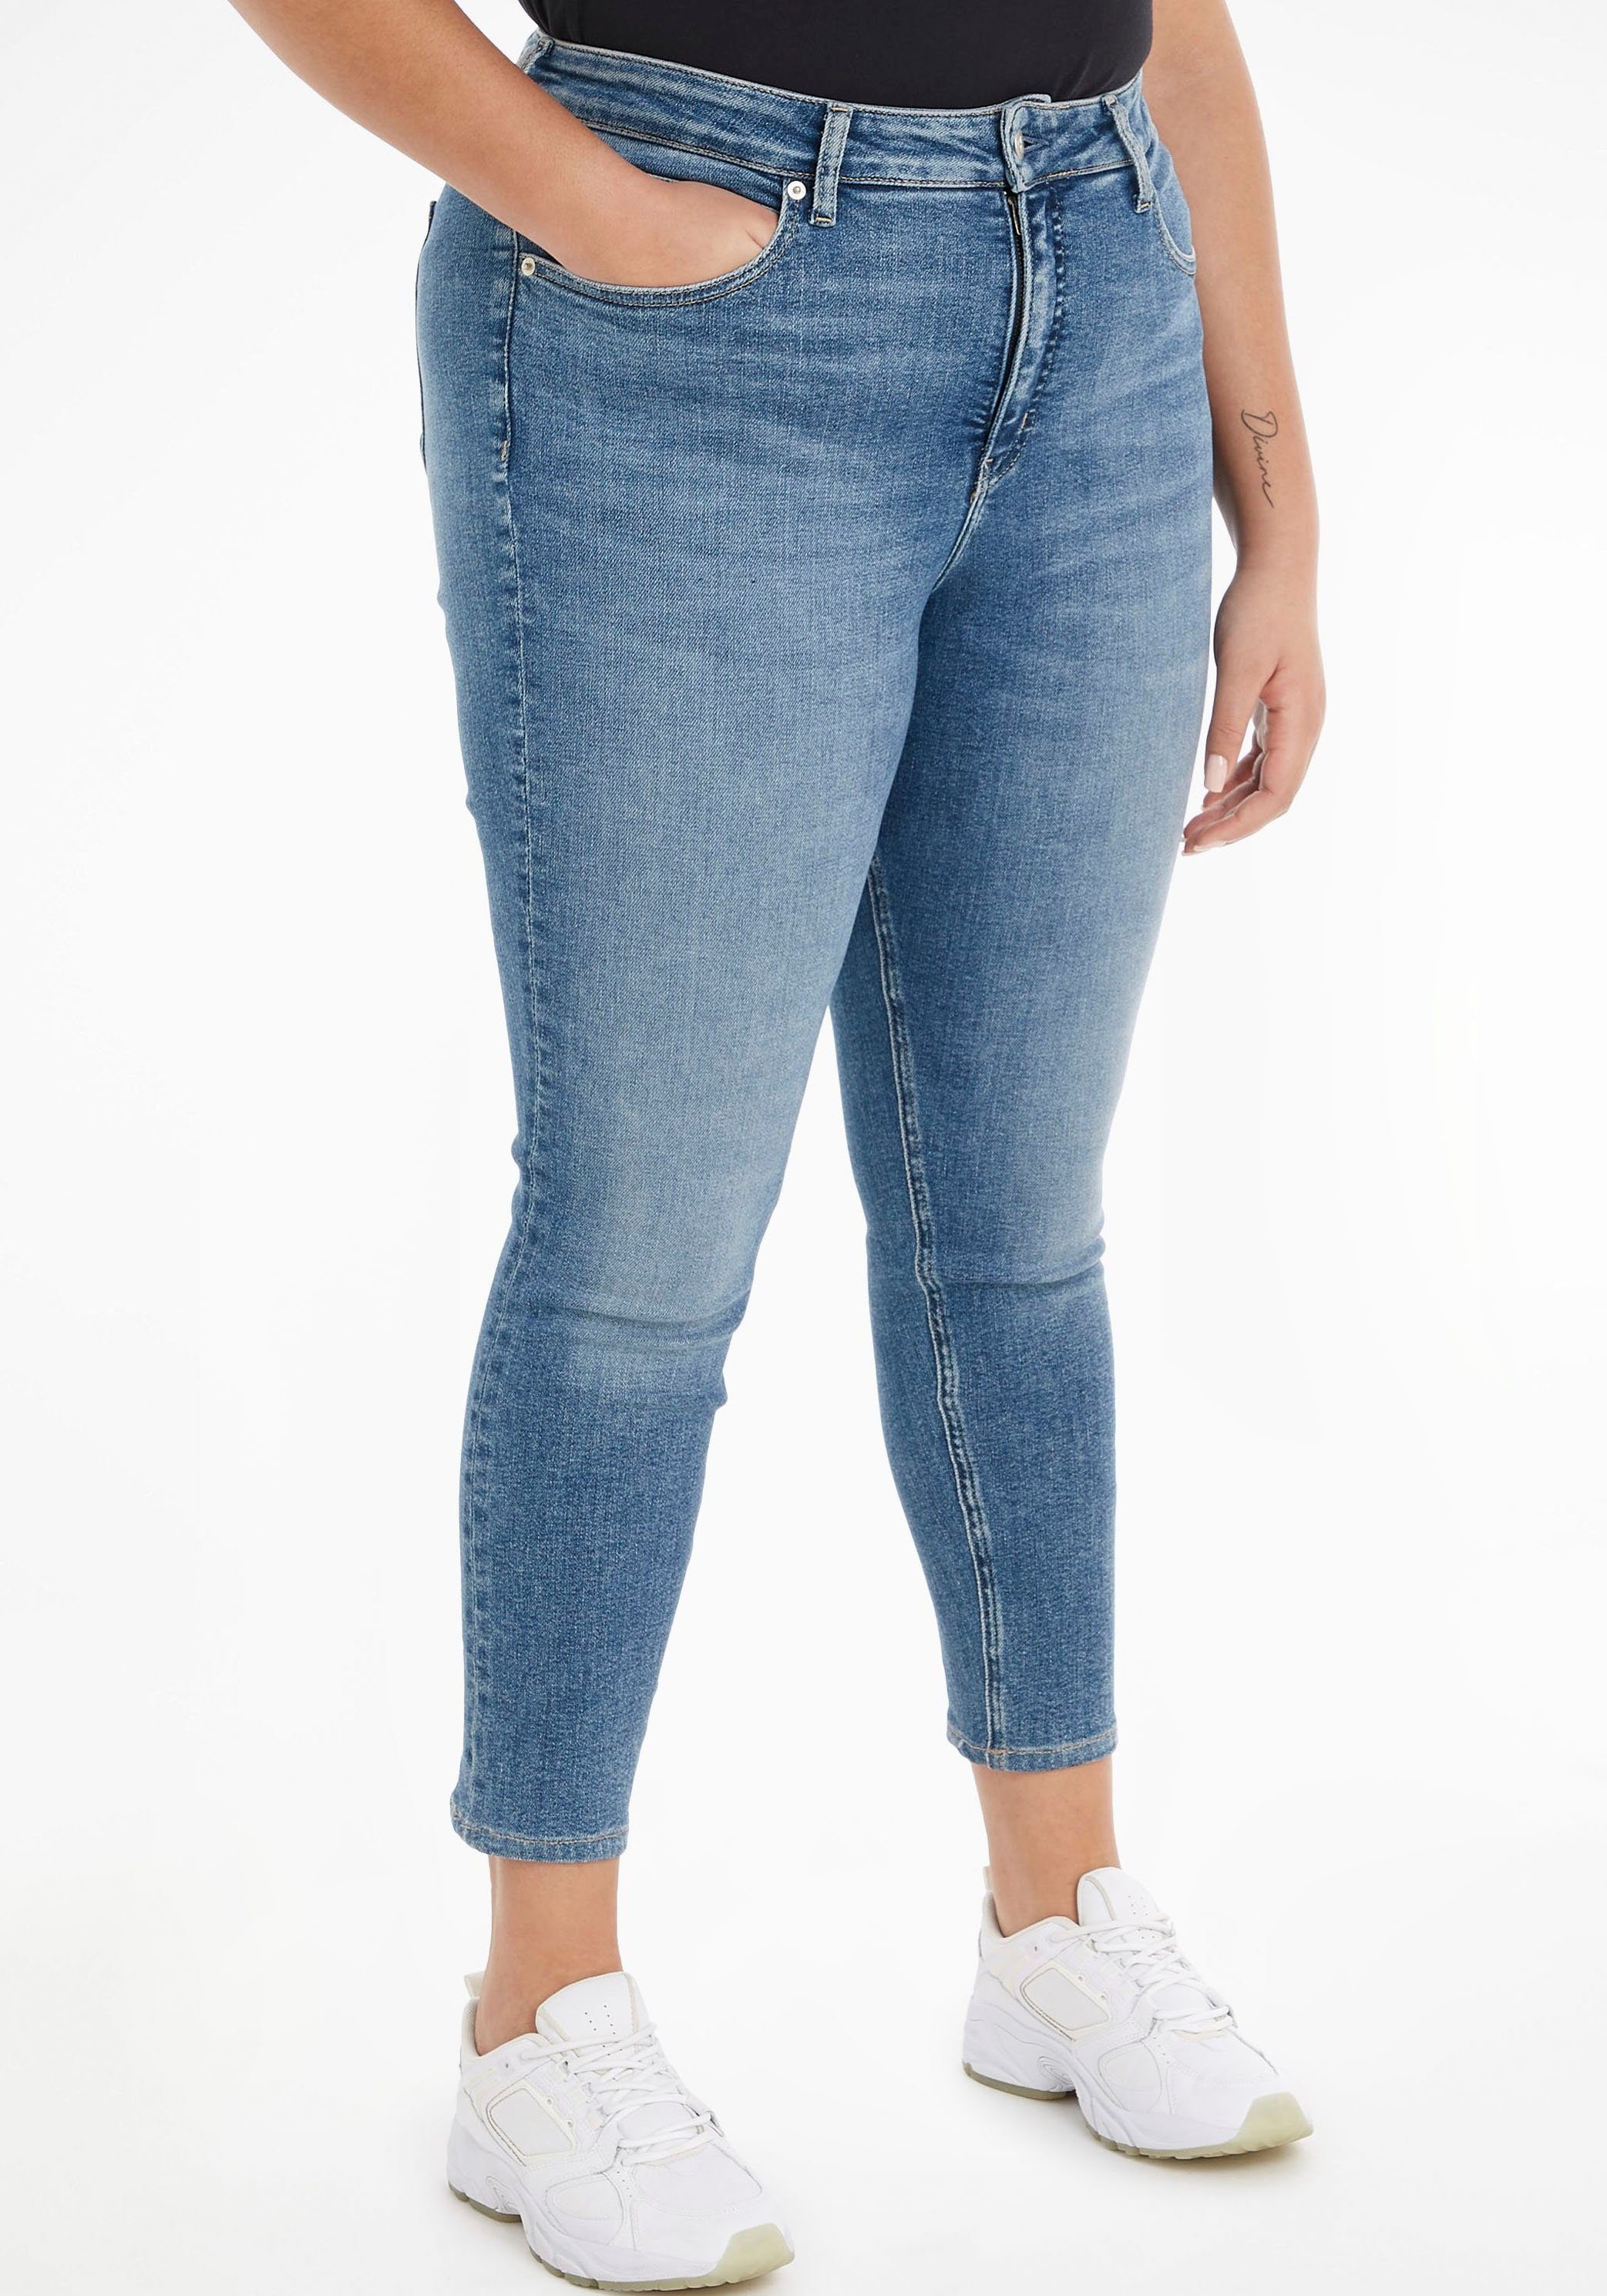 HIGH Skinny-fit-Jeans PLUS Jeans wird Calvin in angeboten Klein Jeans Weiten SKINNY Plus RISE ANKLE